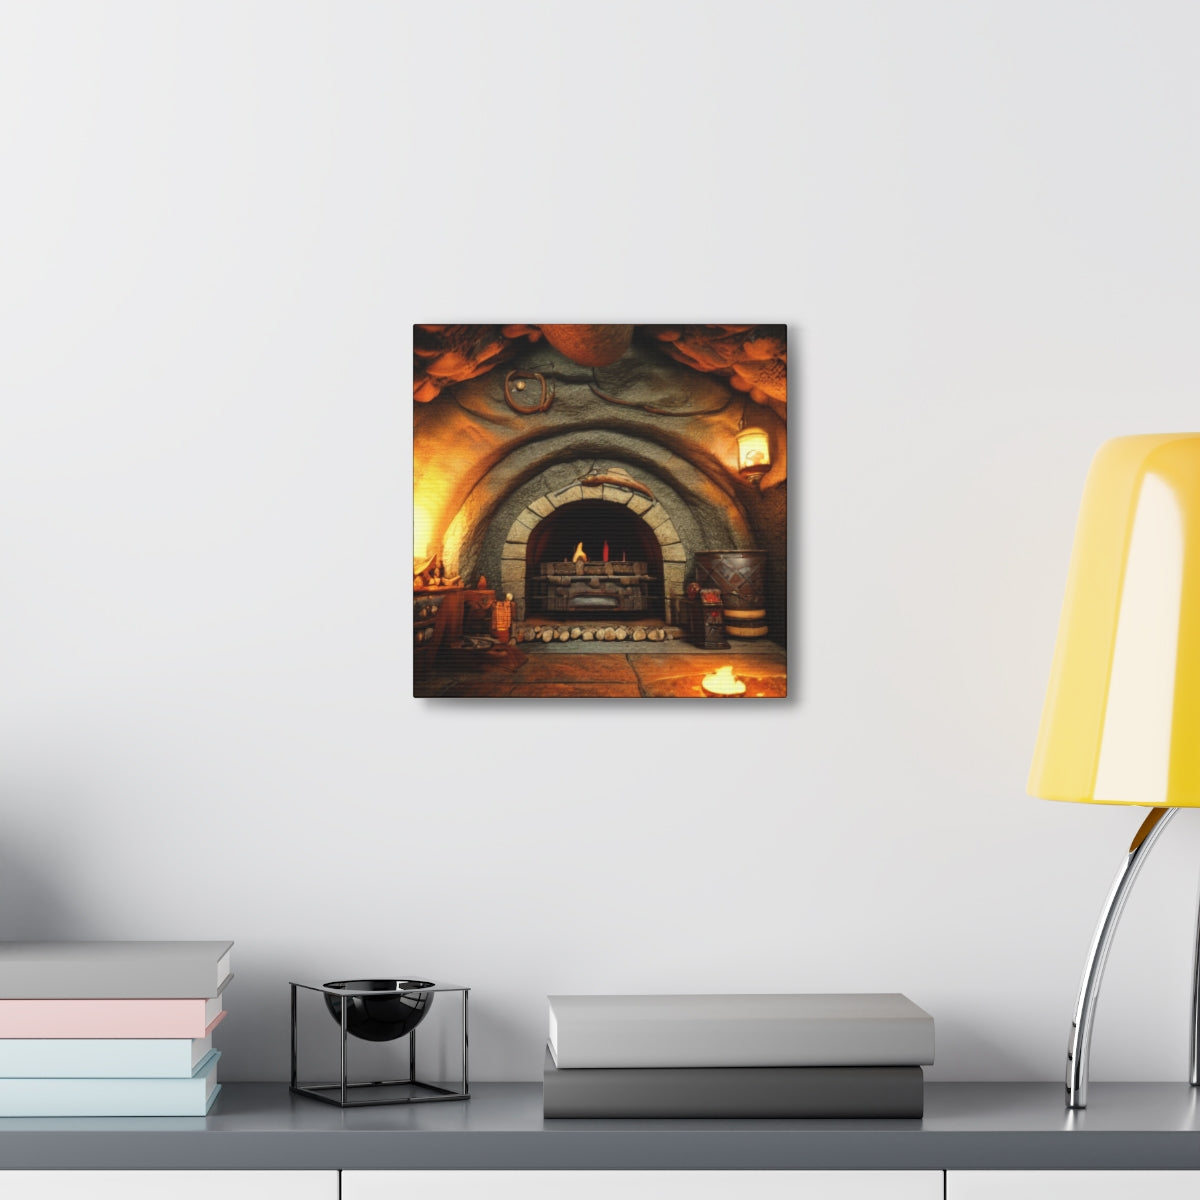 Inside the Hobbit 2 - Canvas Gallery Wrapped Prints